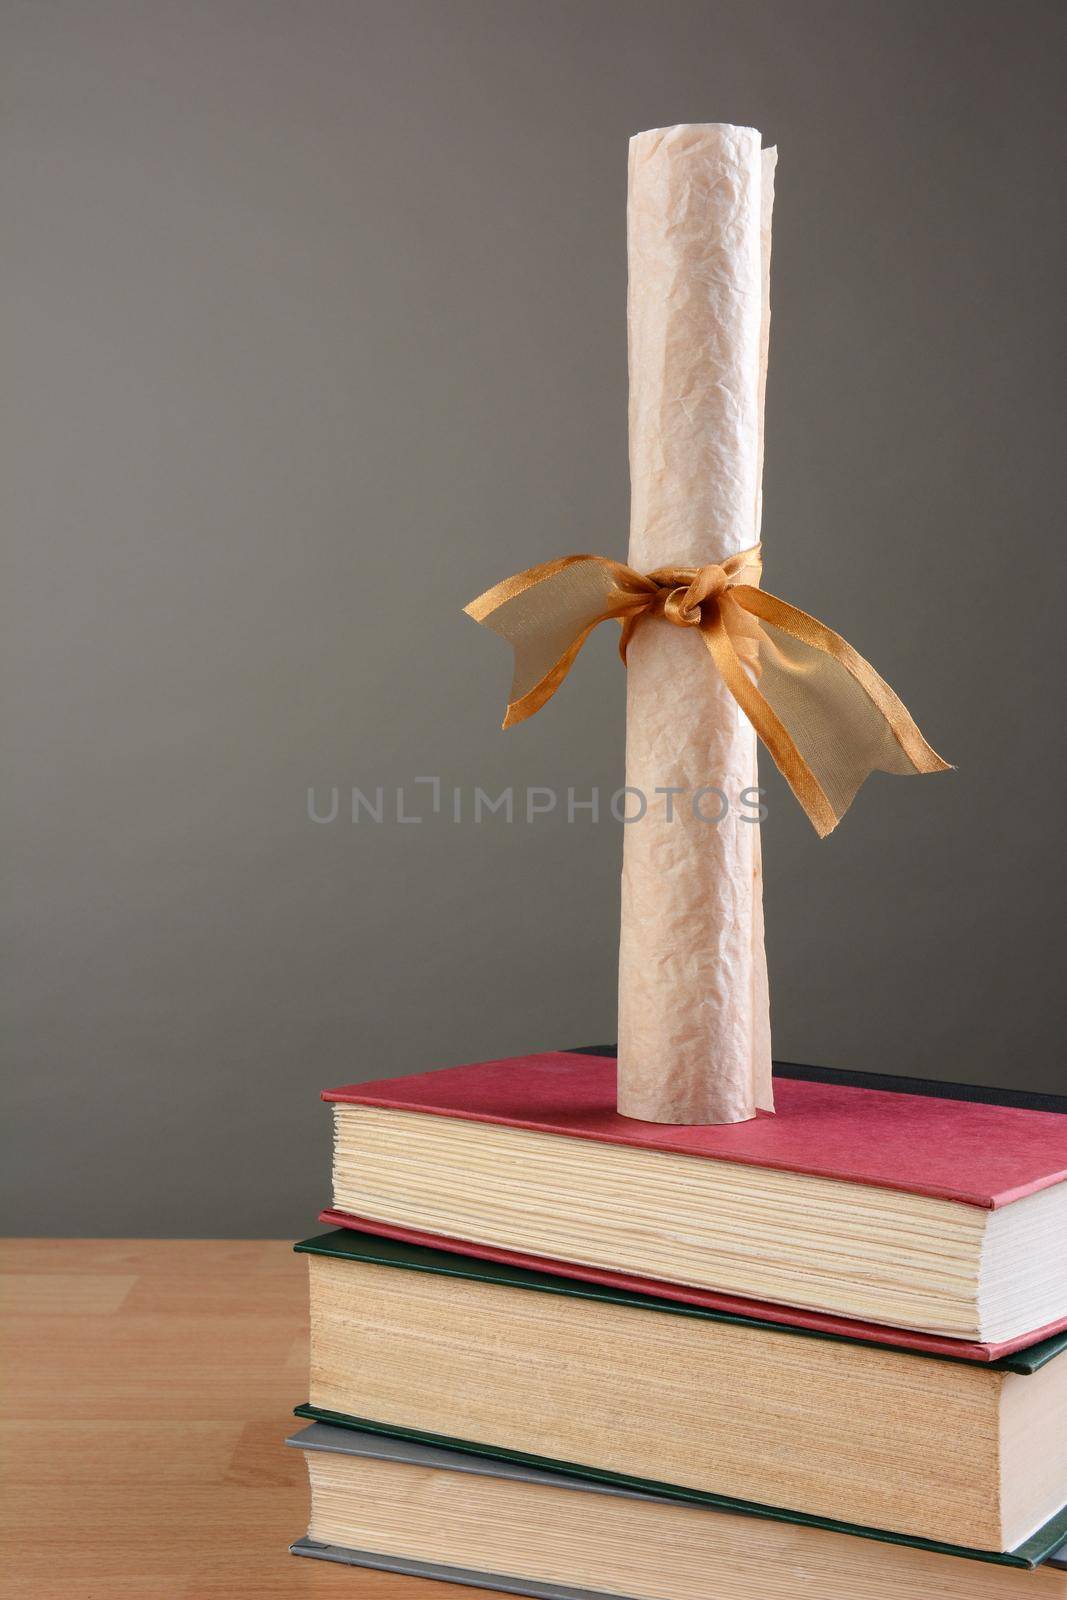 Diploma on Stack of Books by sCukrov